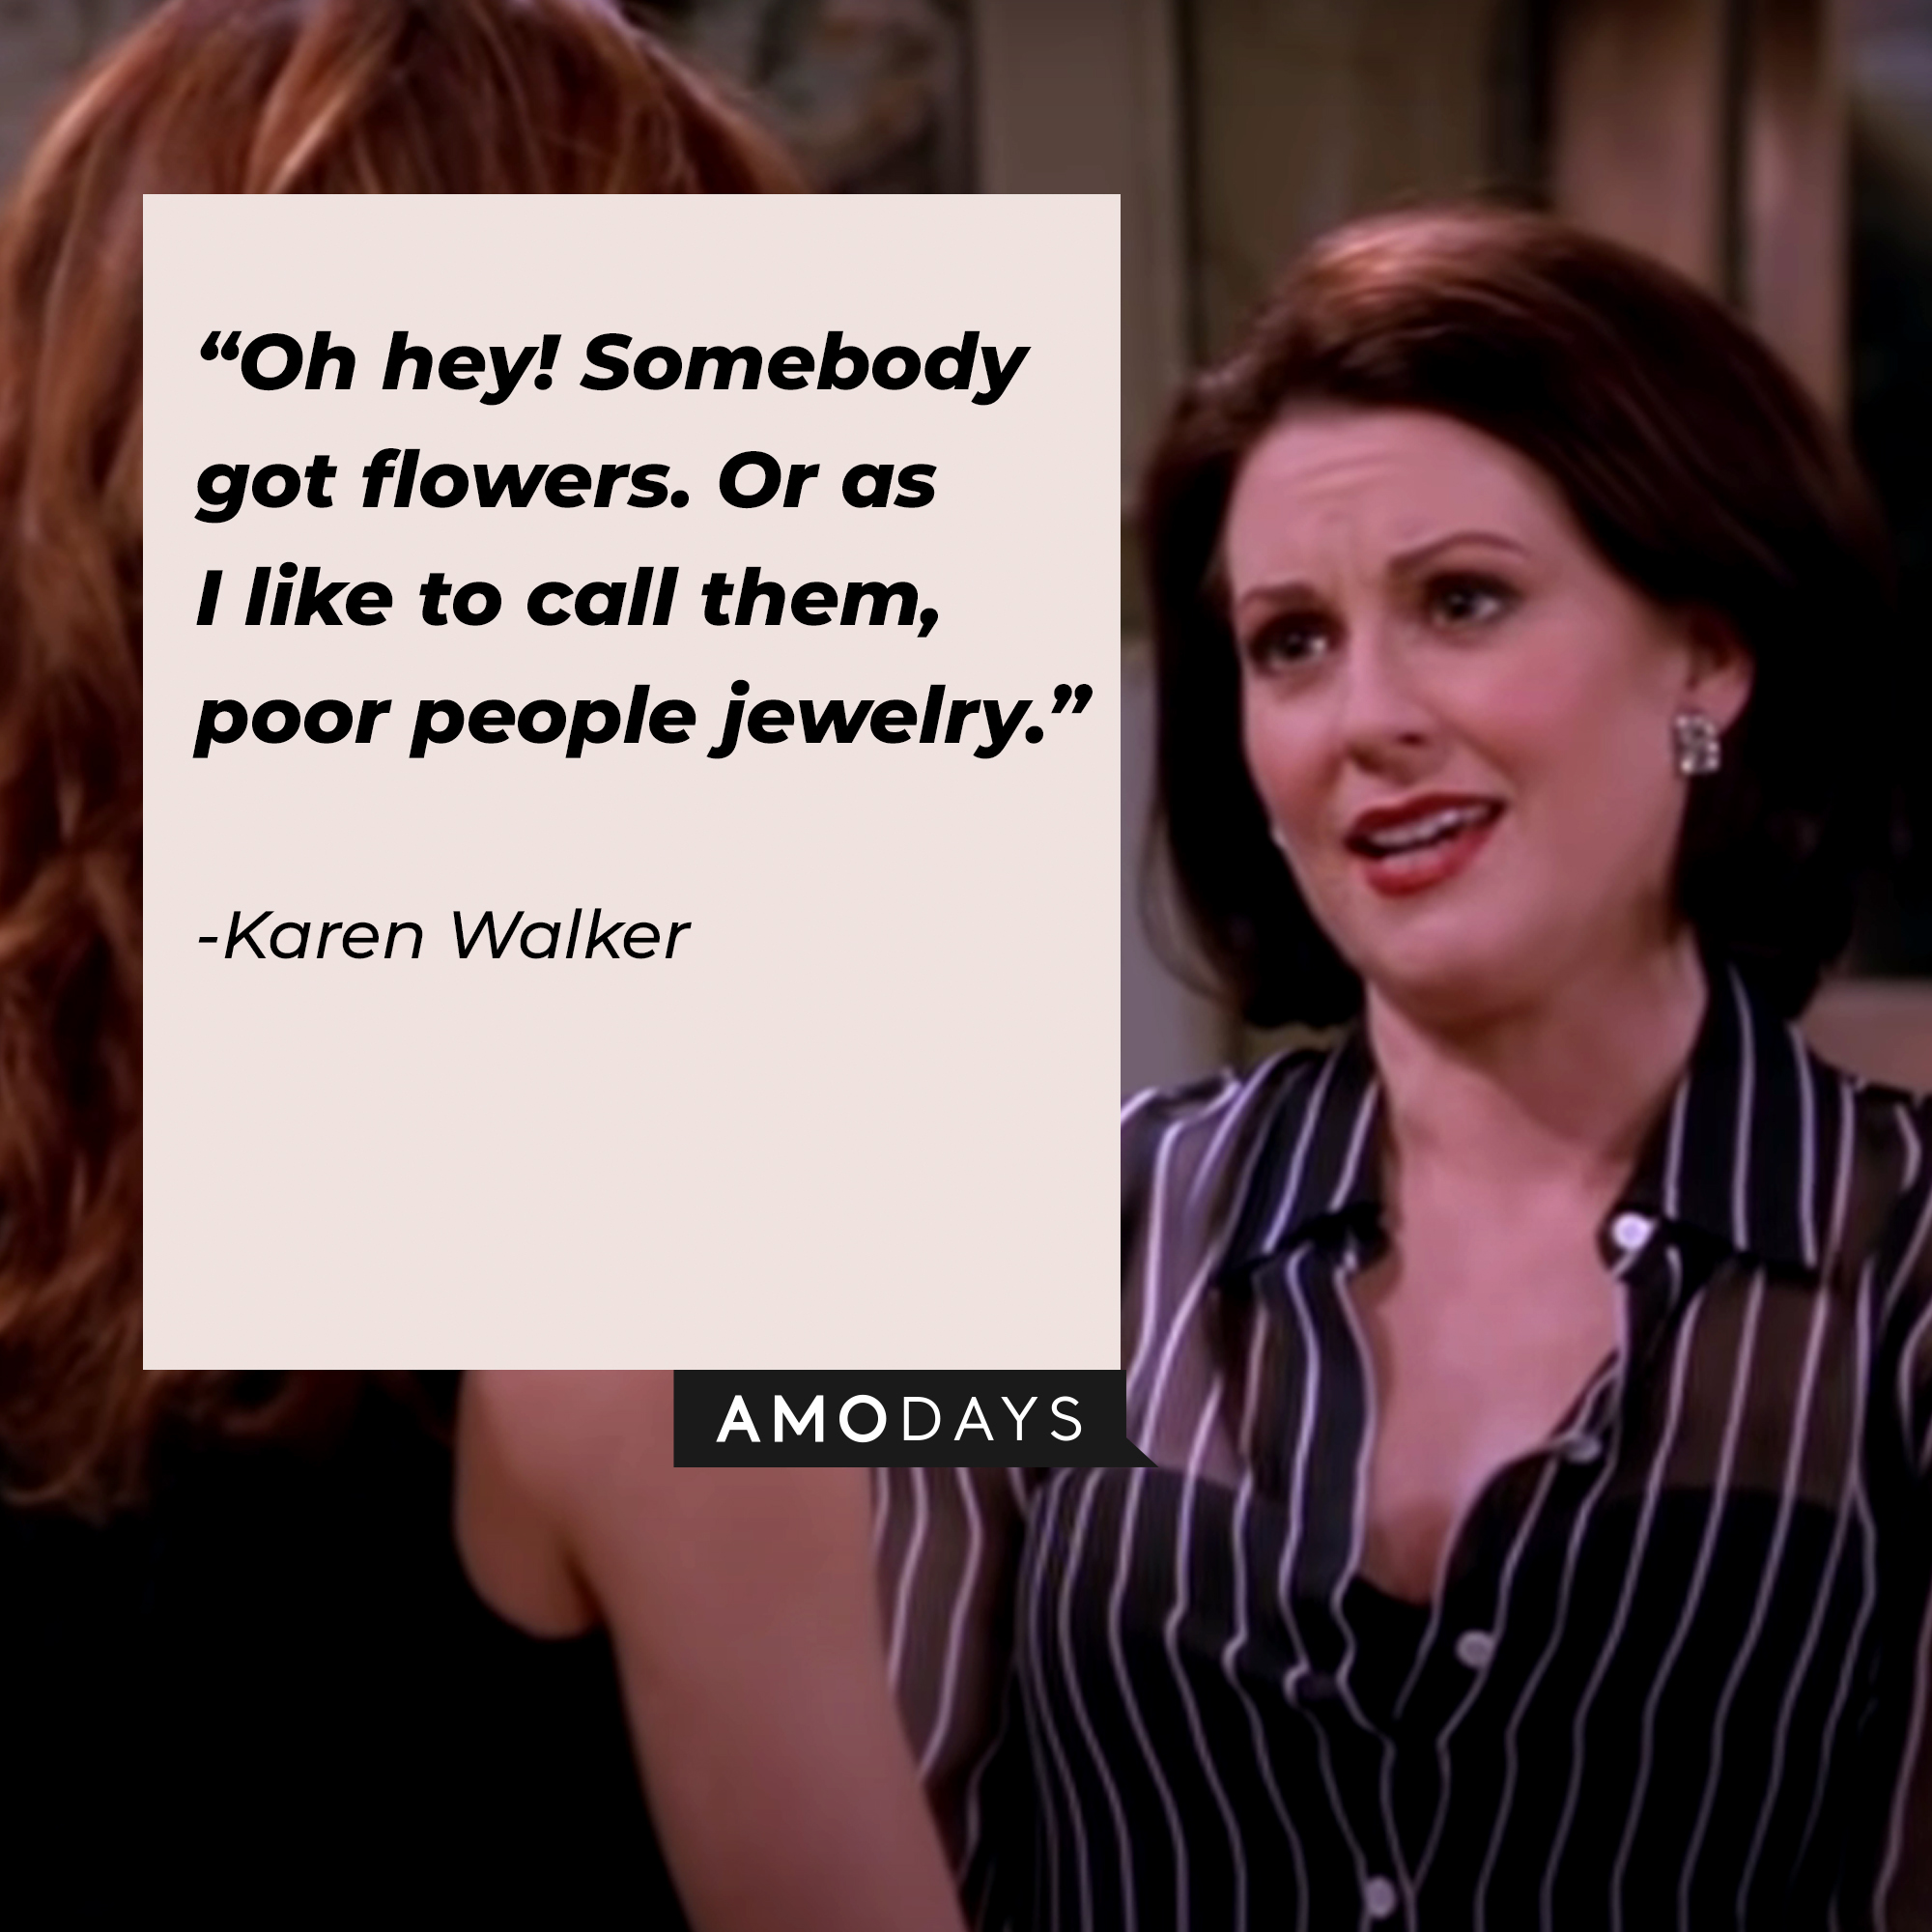 A photo of Karen Walker with the quote, "Oh hey! Somebody got flowers. Or as I like to call them, poor people jewelry." | Source: YouTube/ComedyBites